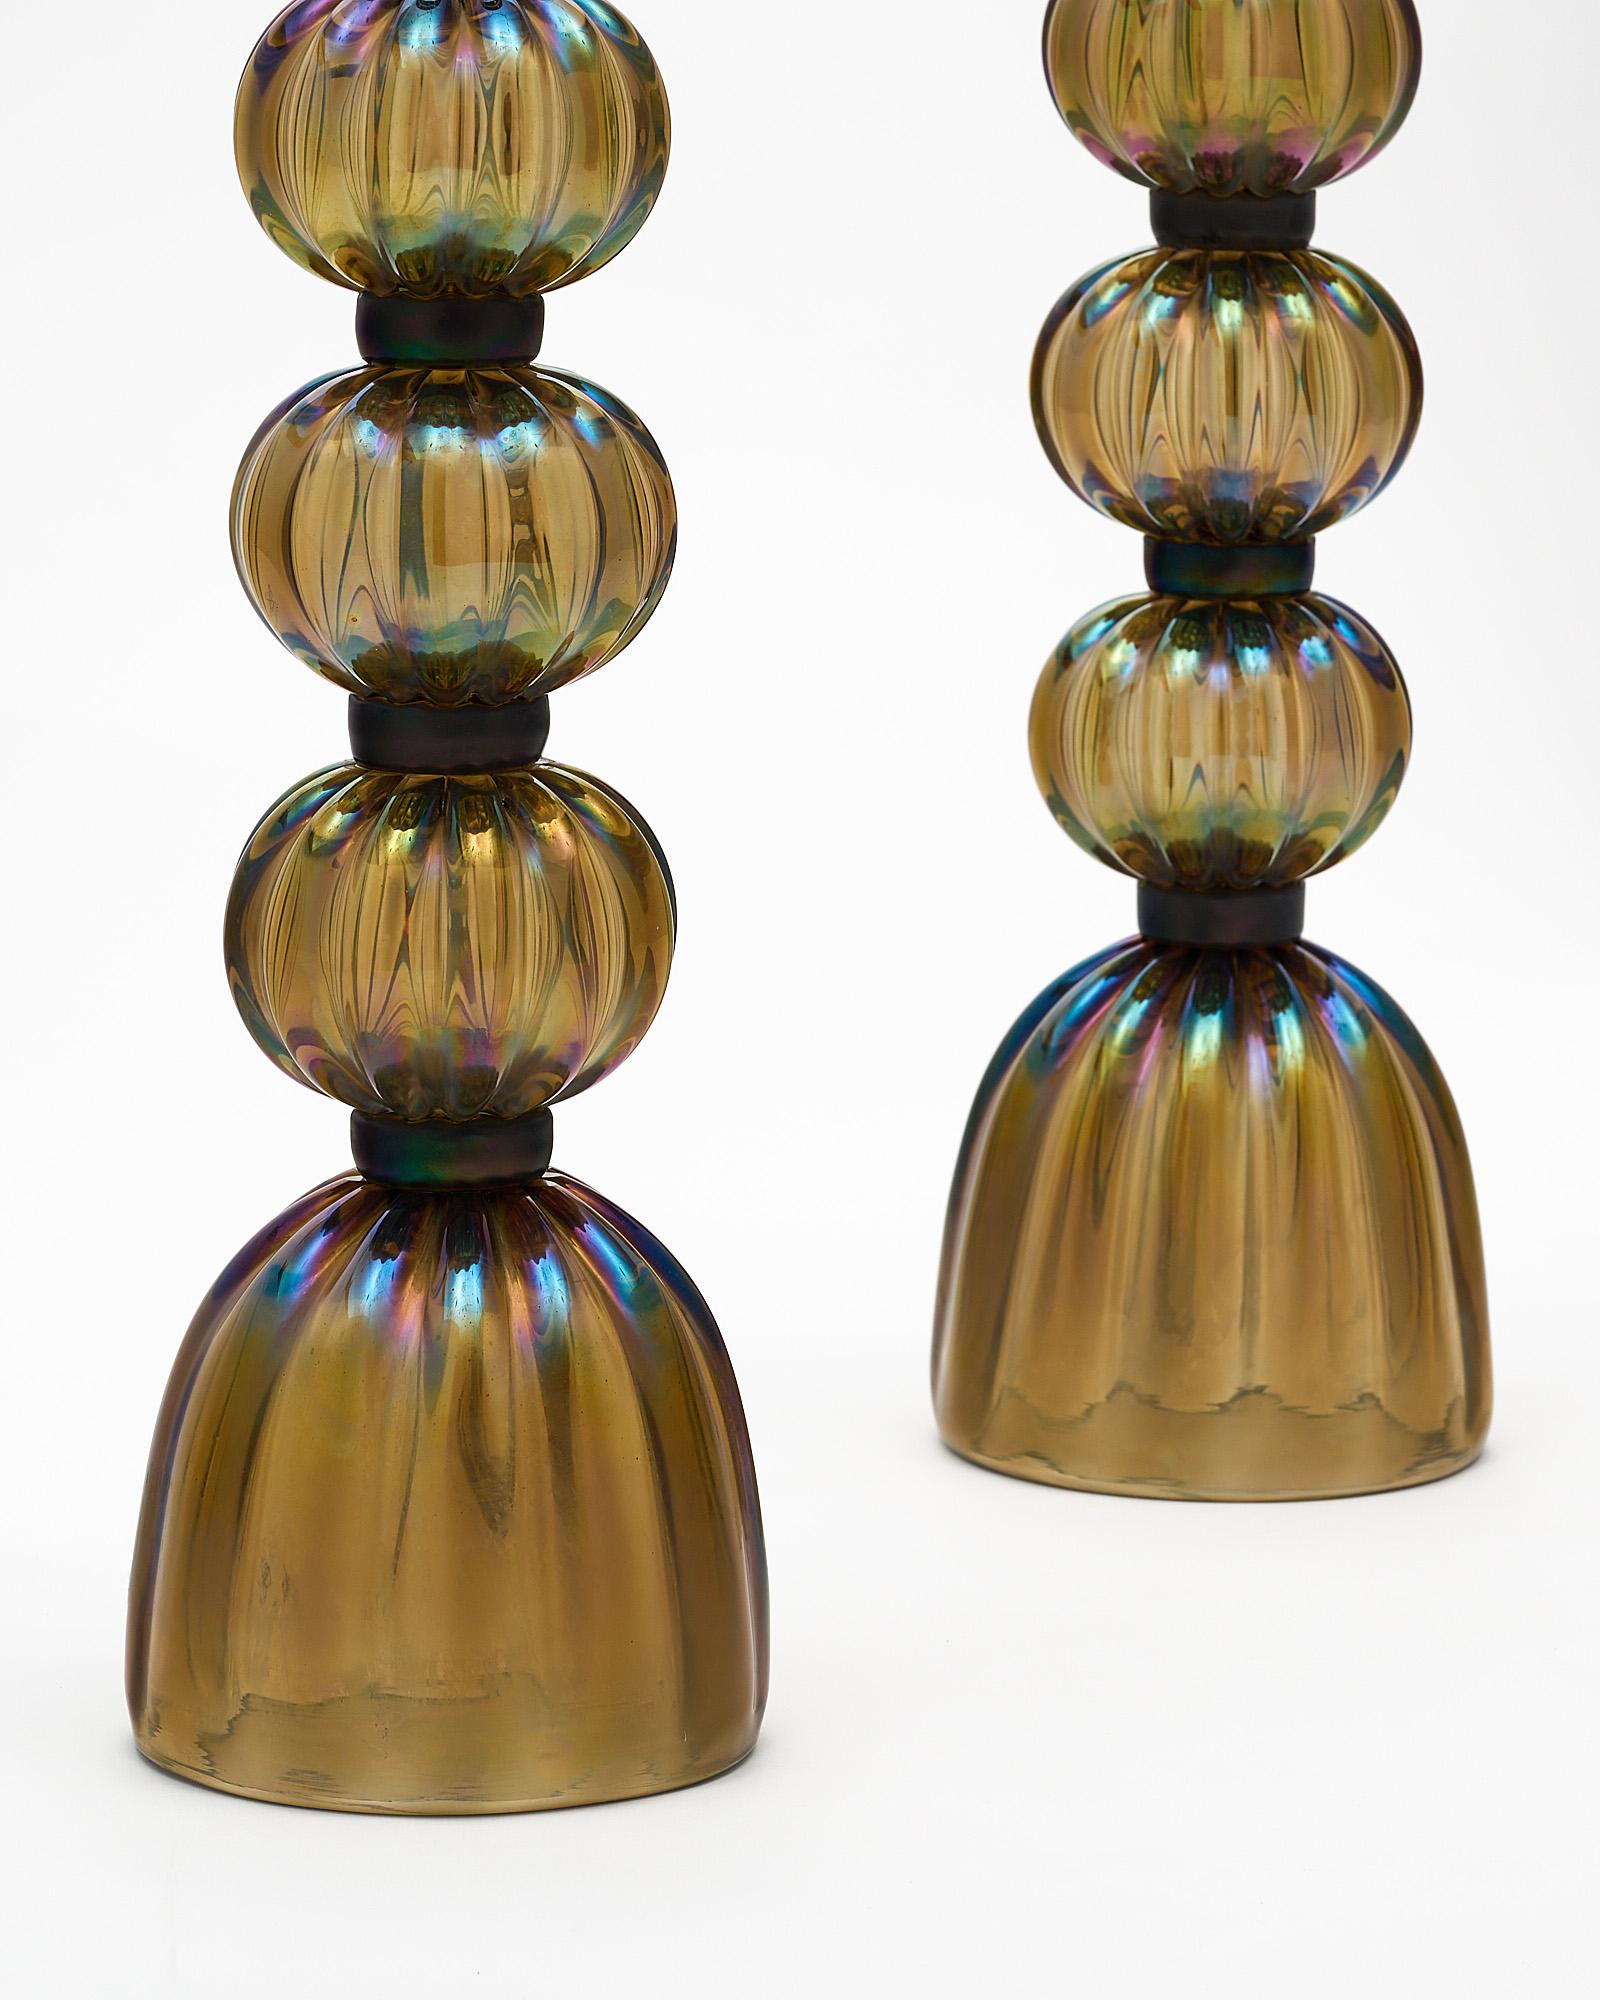 Pair of lamps from Murano, Italy made of hand-blown dark iridescent bronze colored glass. They have been newly wired to fit US standards.